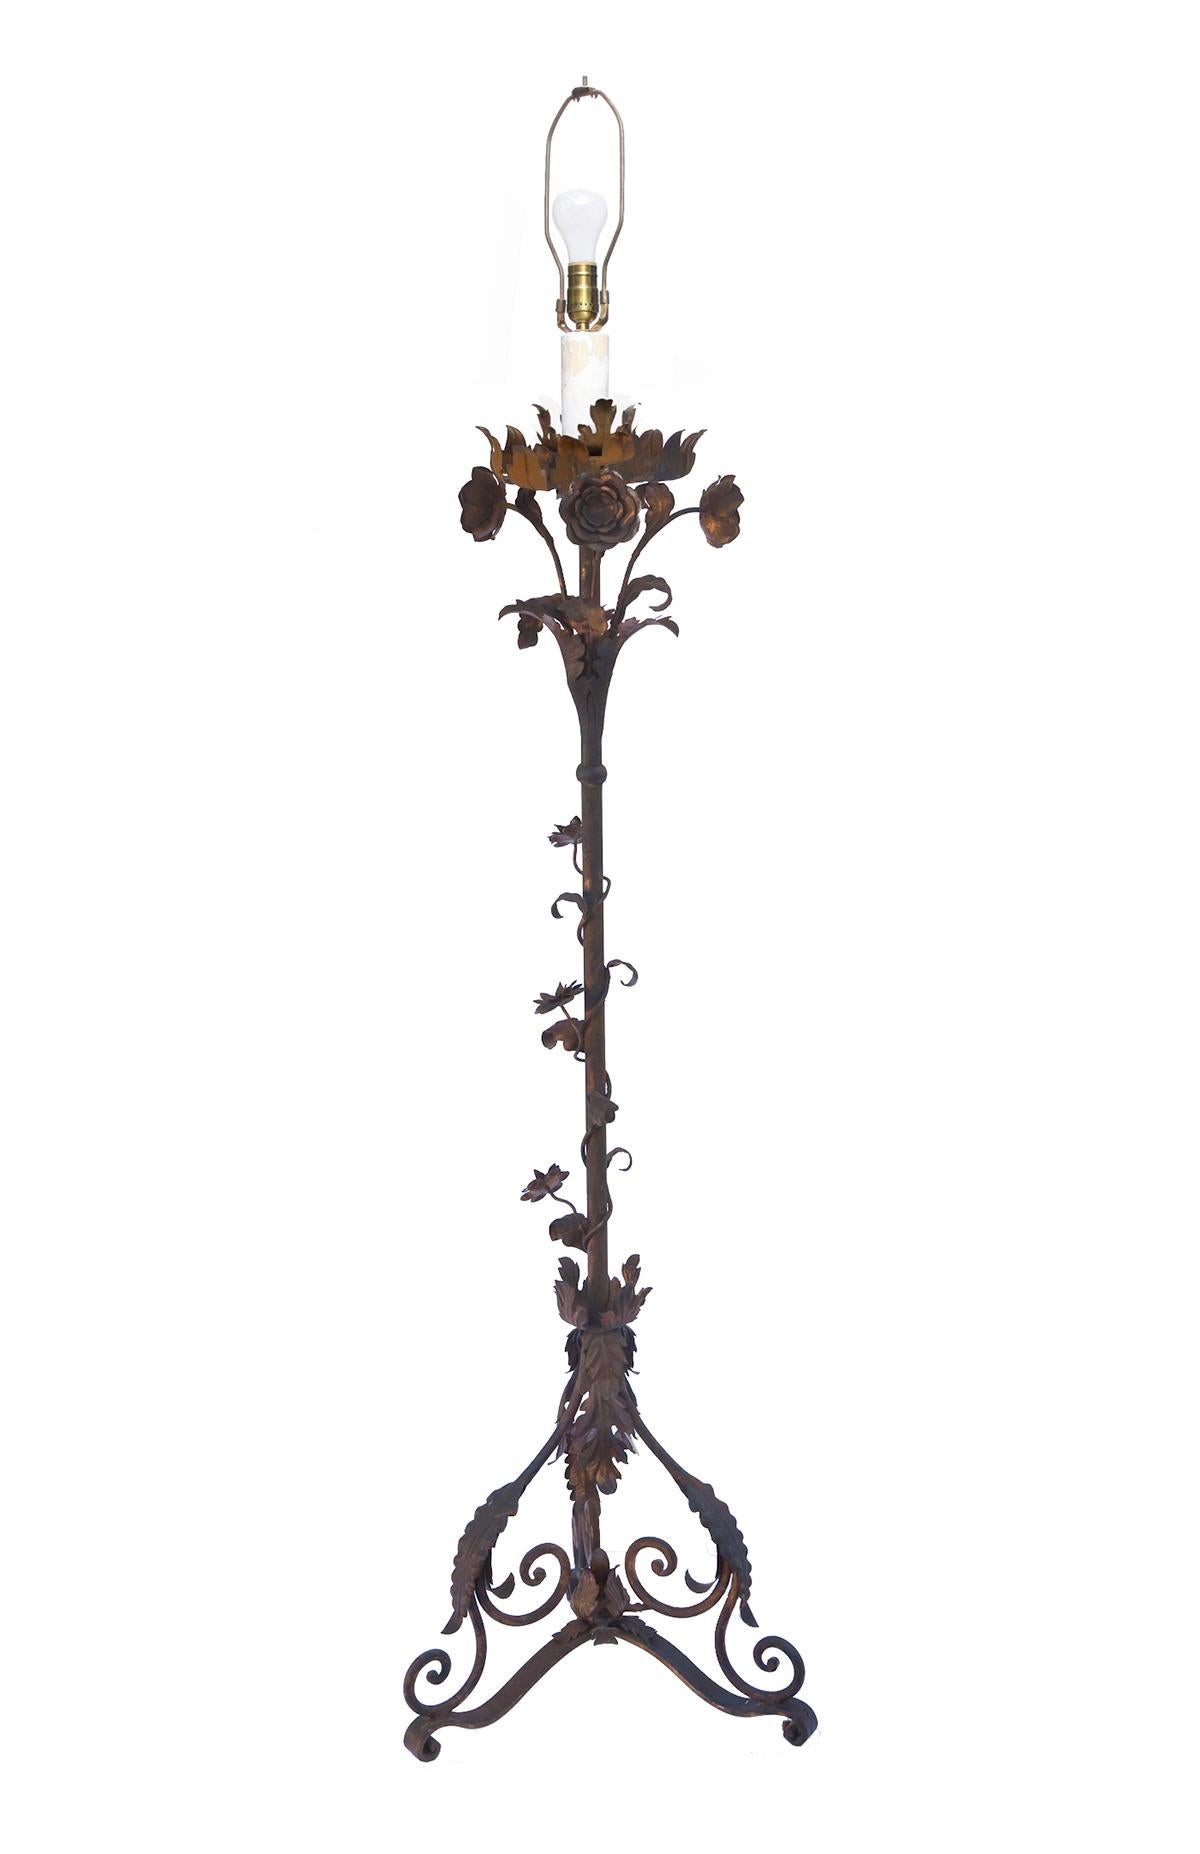 Hand crafted vintage Italian wrought iron floor lamp, Stunning craftsmanship with lots of ornate detail. The gilt finish has been aged with oxidizers to add a natural rust patina over the original gilt surface. 
Re-wired with solid brass sockets &